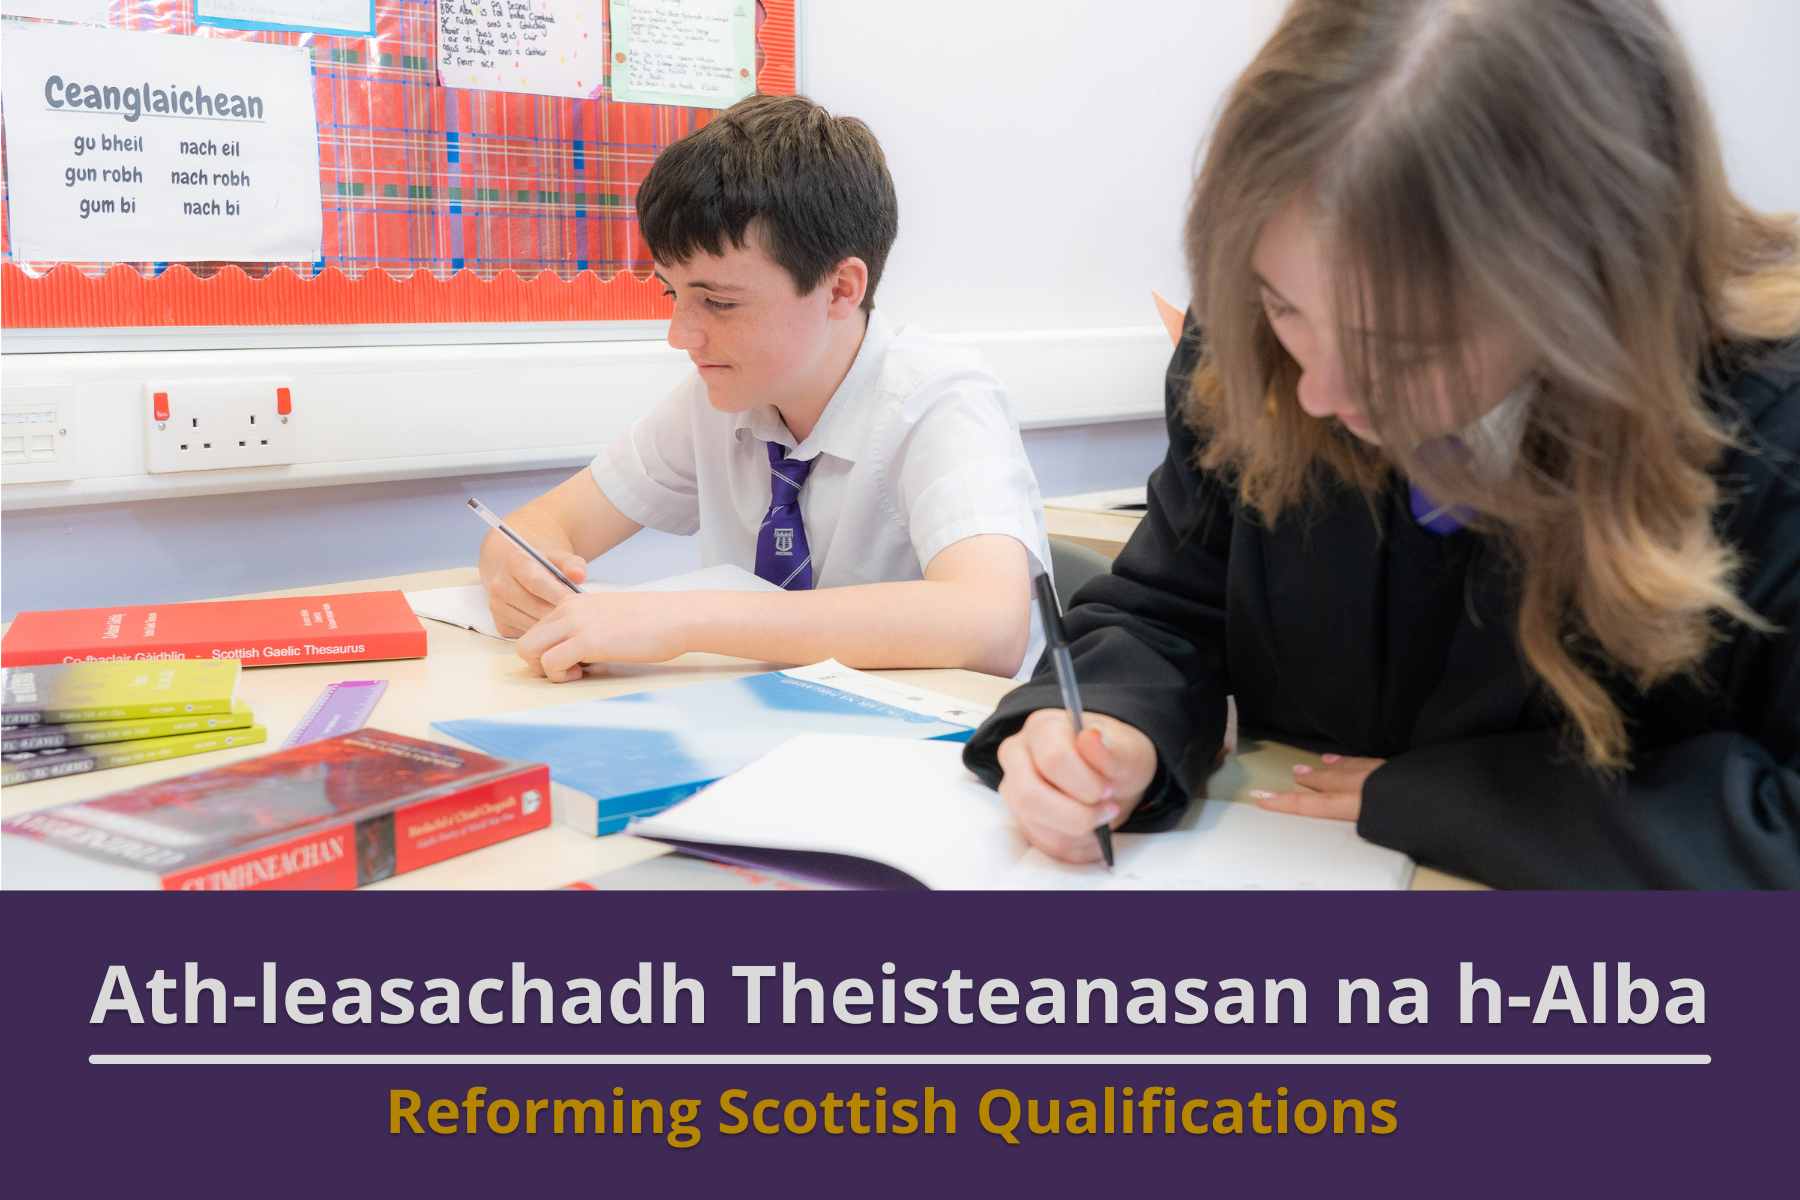 Picture: A high school aged boy and girl working at their desk in a classroom with textbooks infront of them. Text reads 'Reforming Scottish Qualifications'